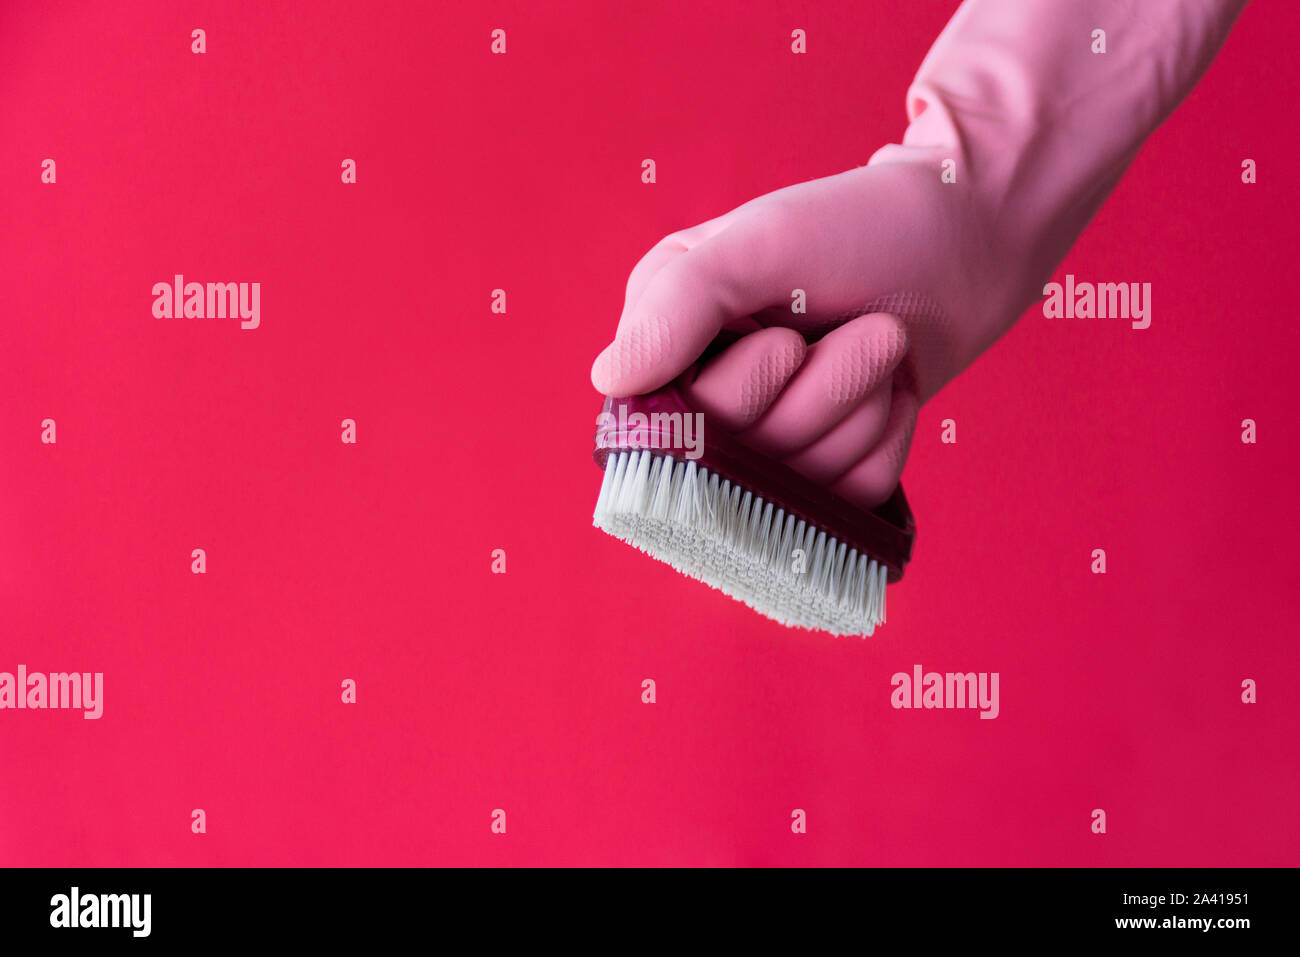 Hand in pink latex protective glove with dust brush on pink background. Cleaning and housework work concept Stock Photo